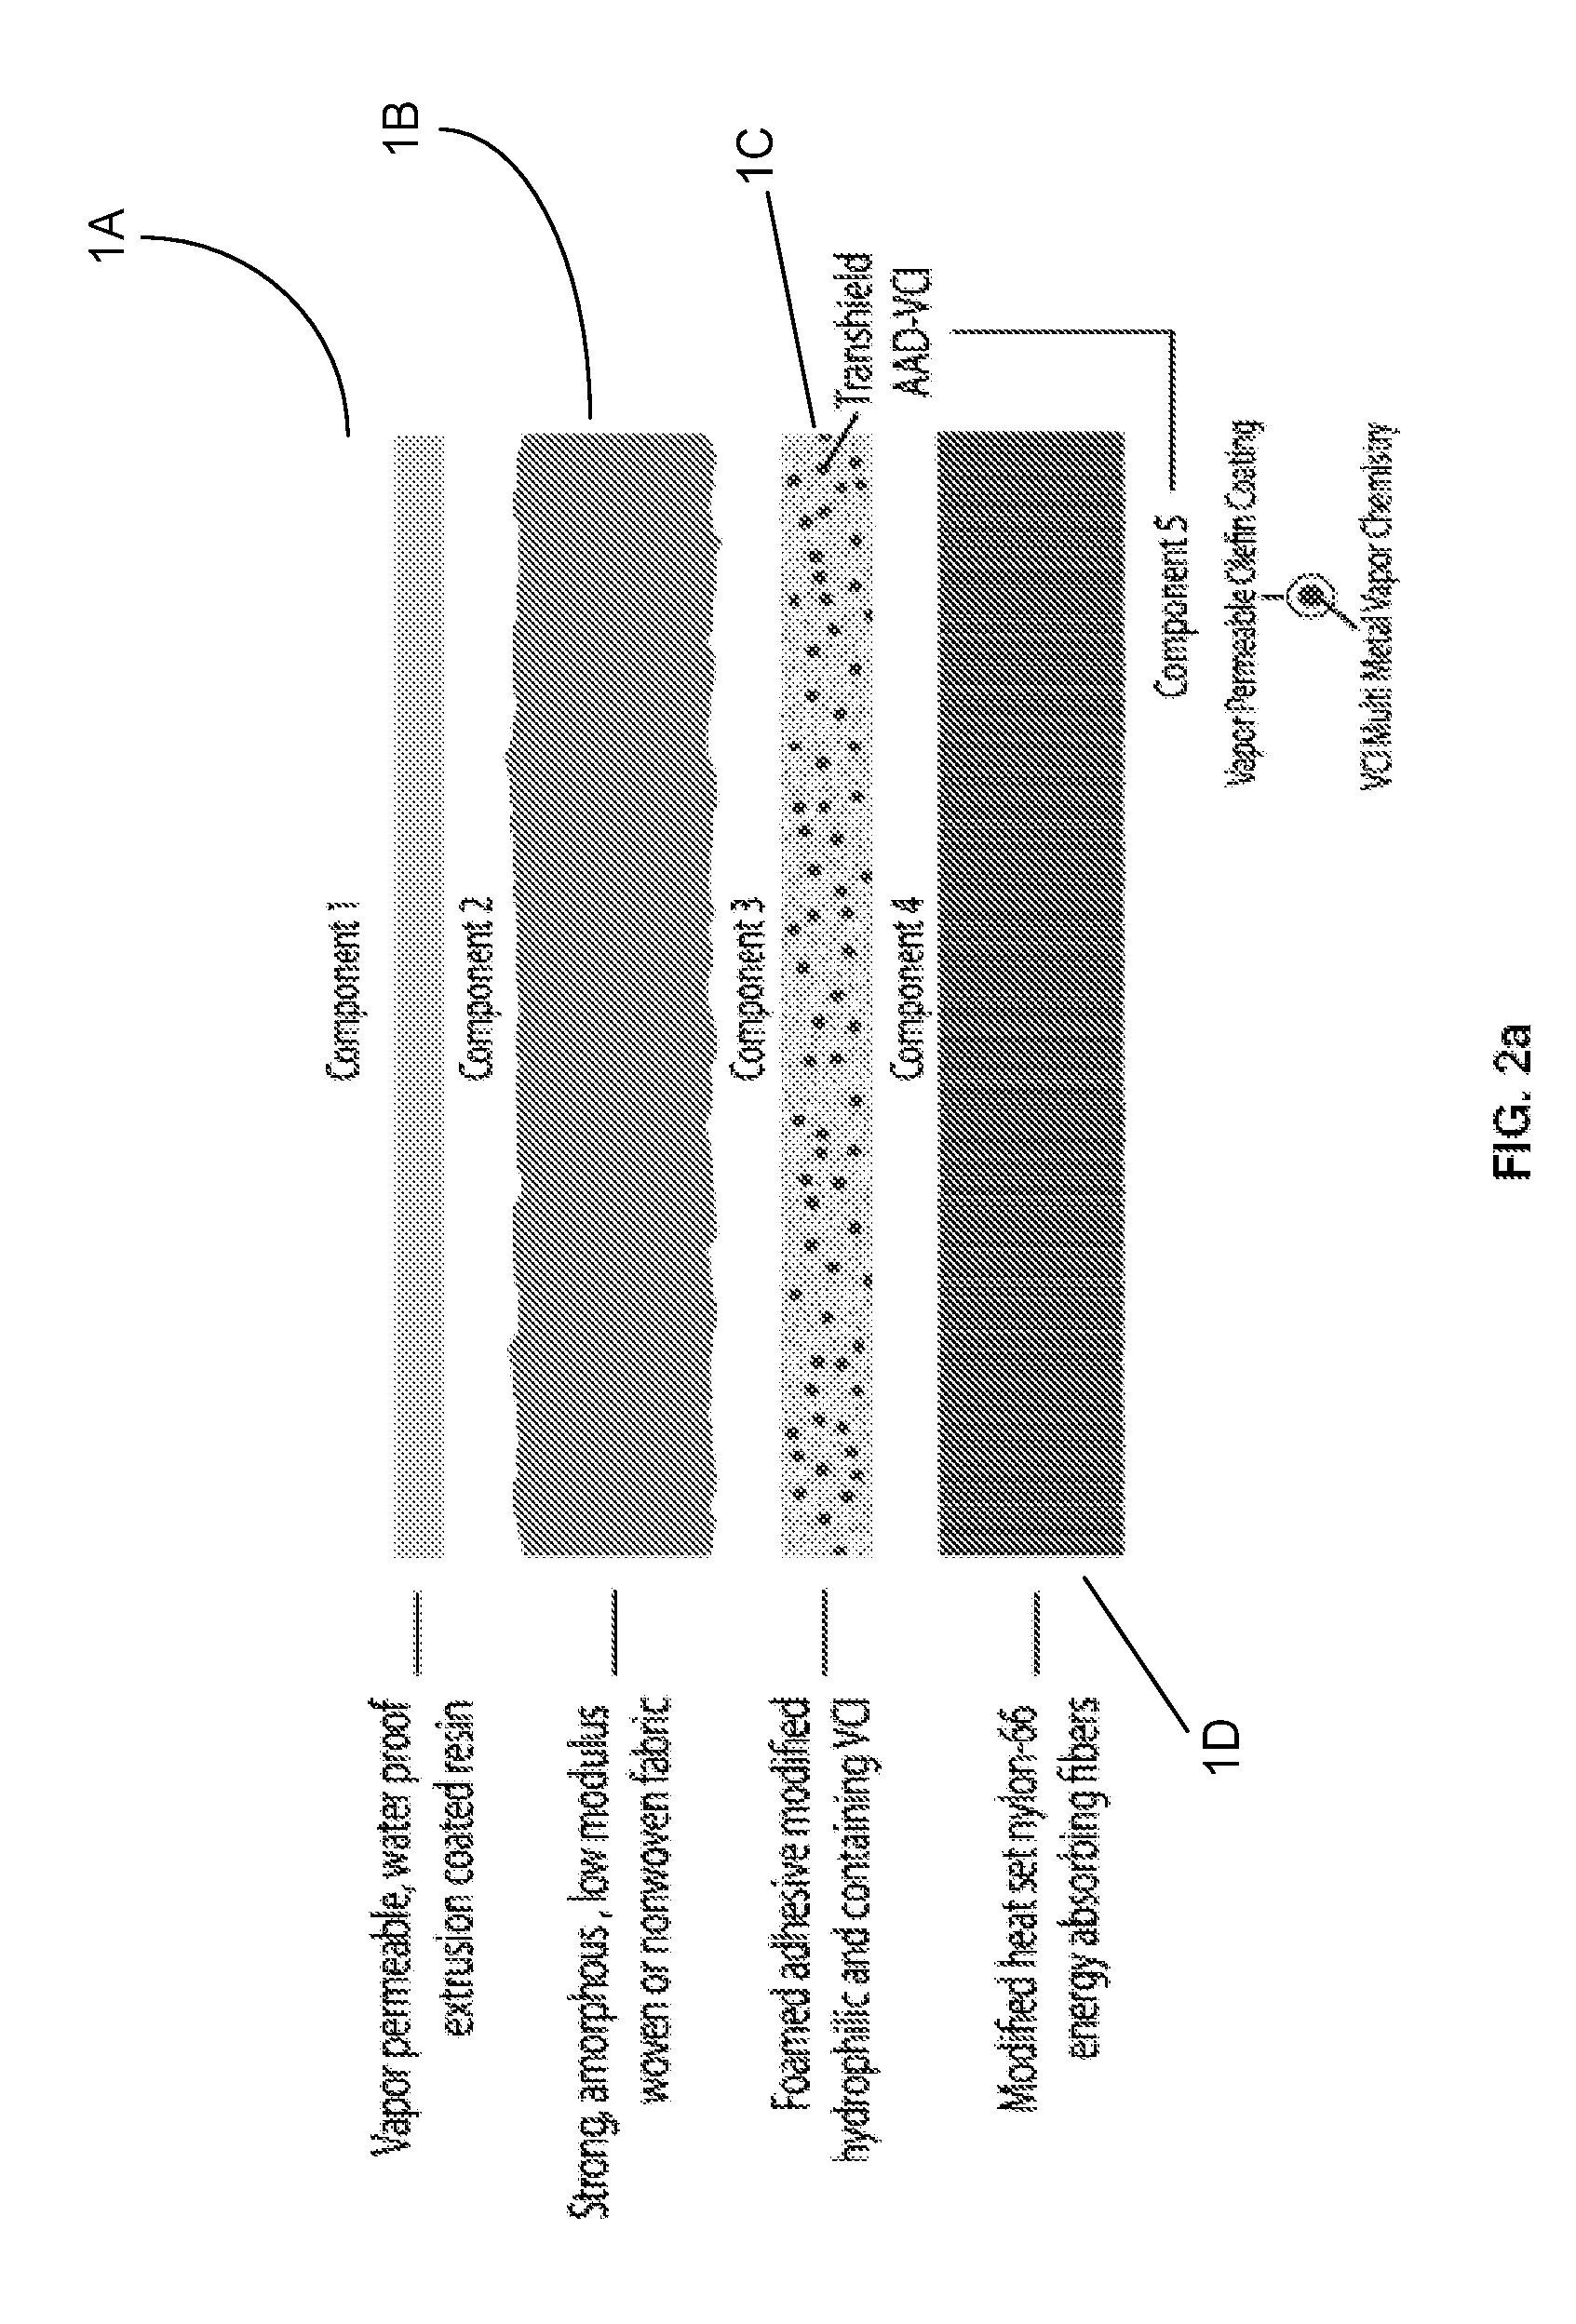 Vapor permeable fabric constructs with static or dynamic antimicrobial compositions